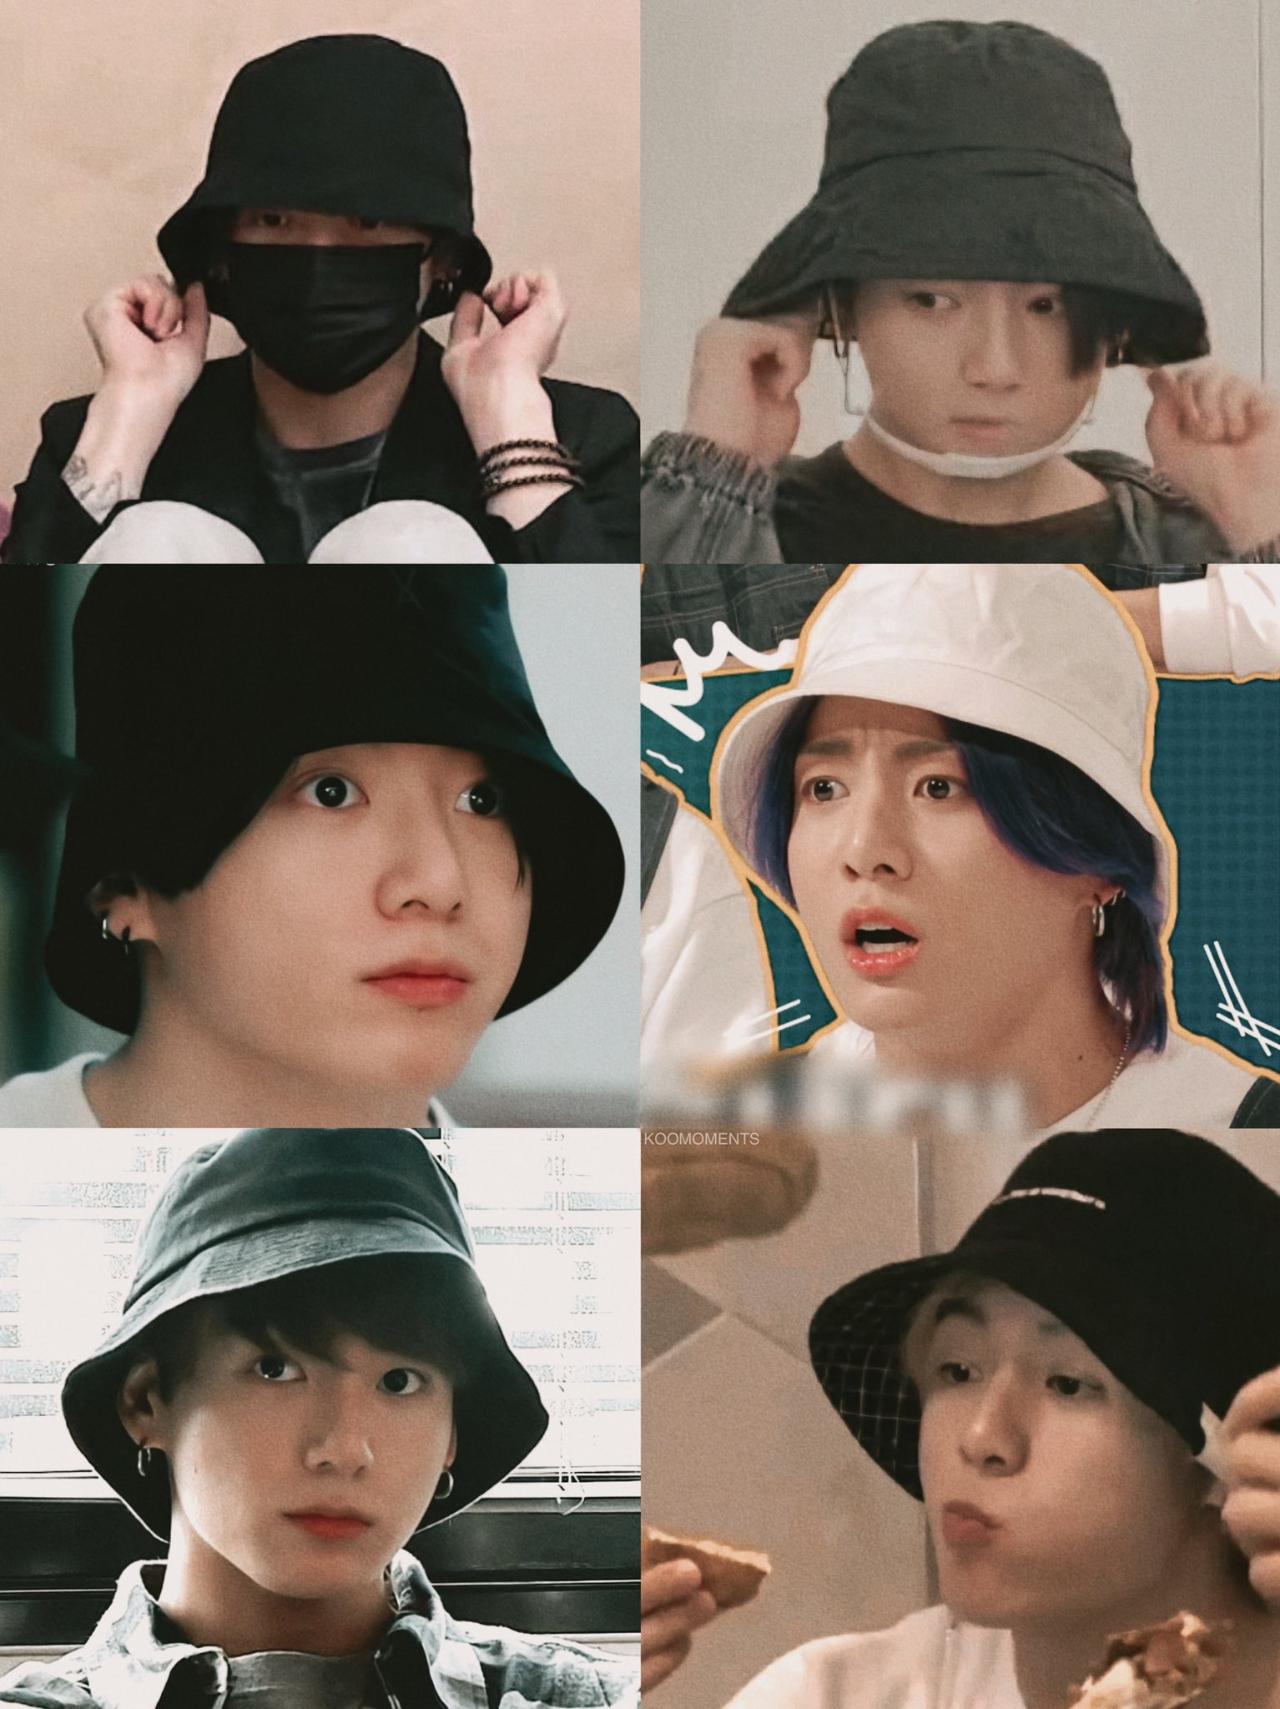 Another essential item in the maknae's closet is his dear bucket hat! The two are almost inseparable - a bucket hat, a beanie or cap feature in nearly every outfit that the artist wears. Jungkook looks absolutely adorable when he pulls on his bucket hat over his ears and doe eyes